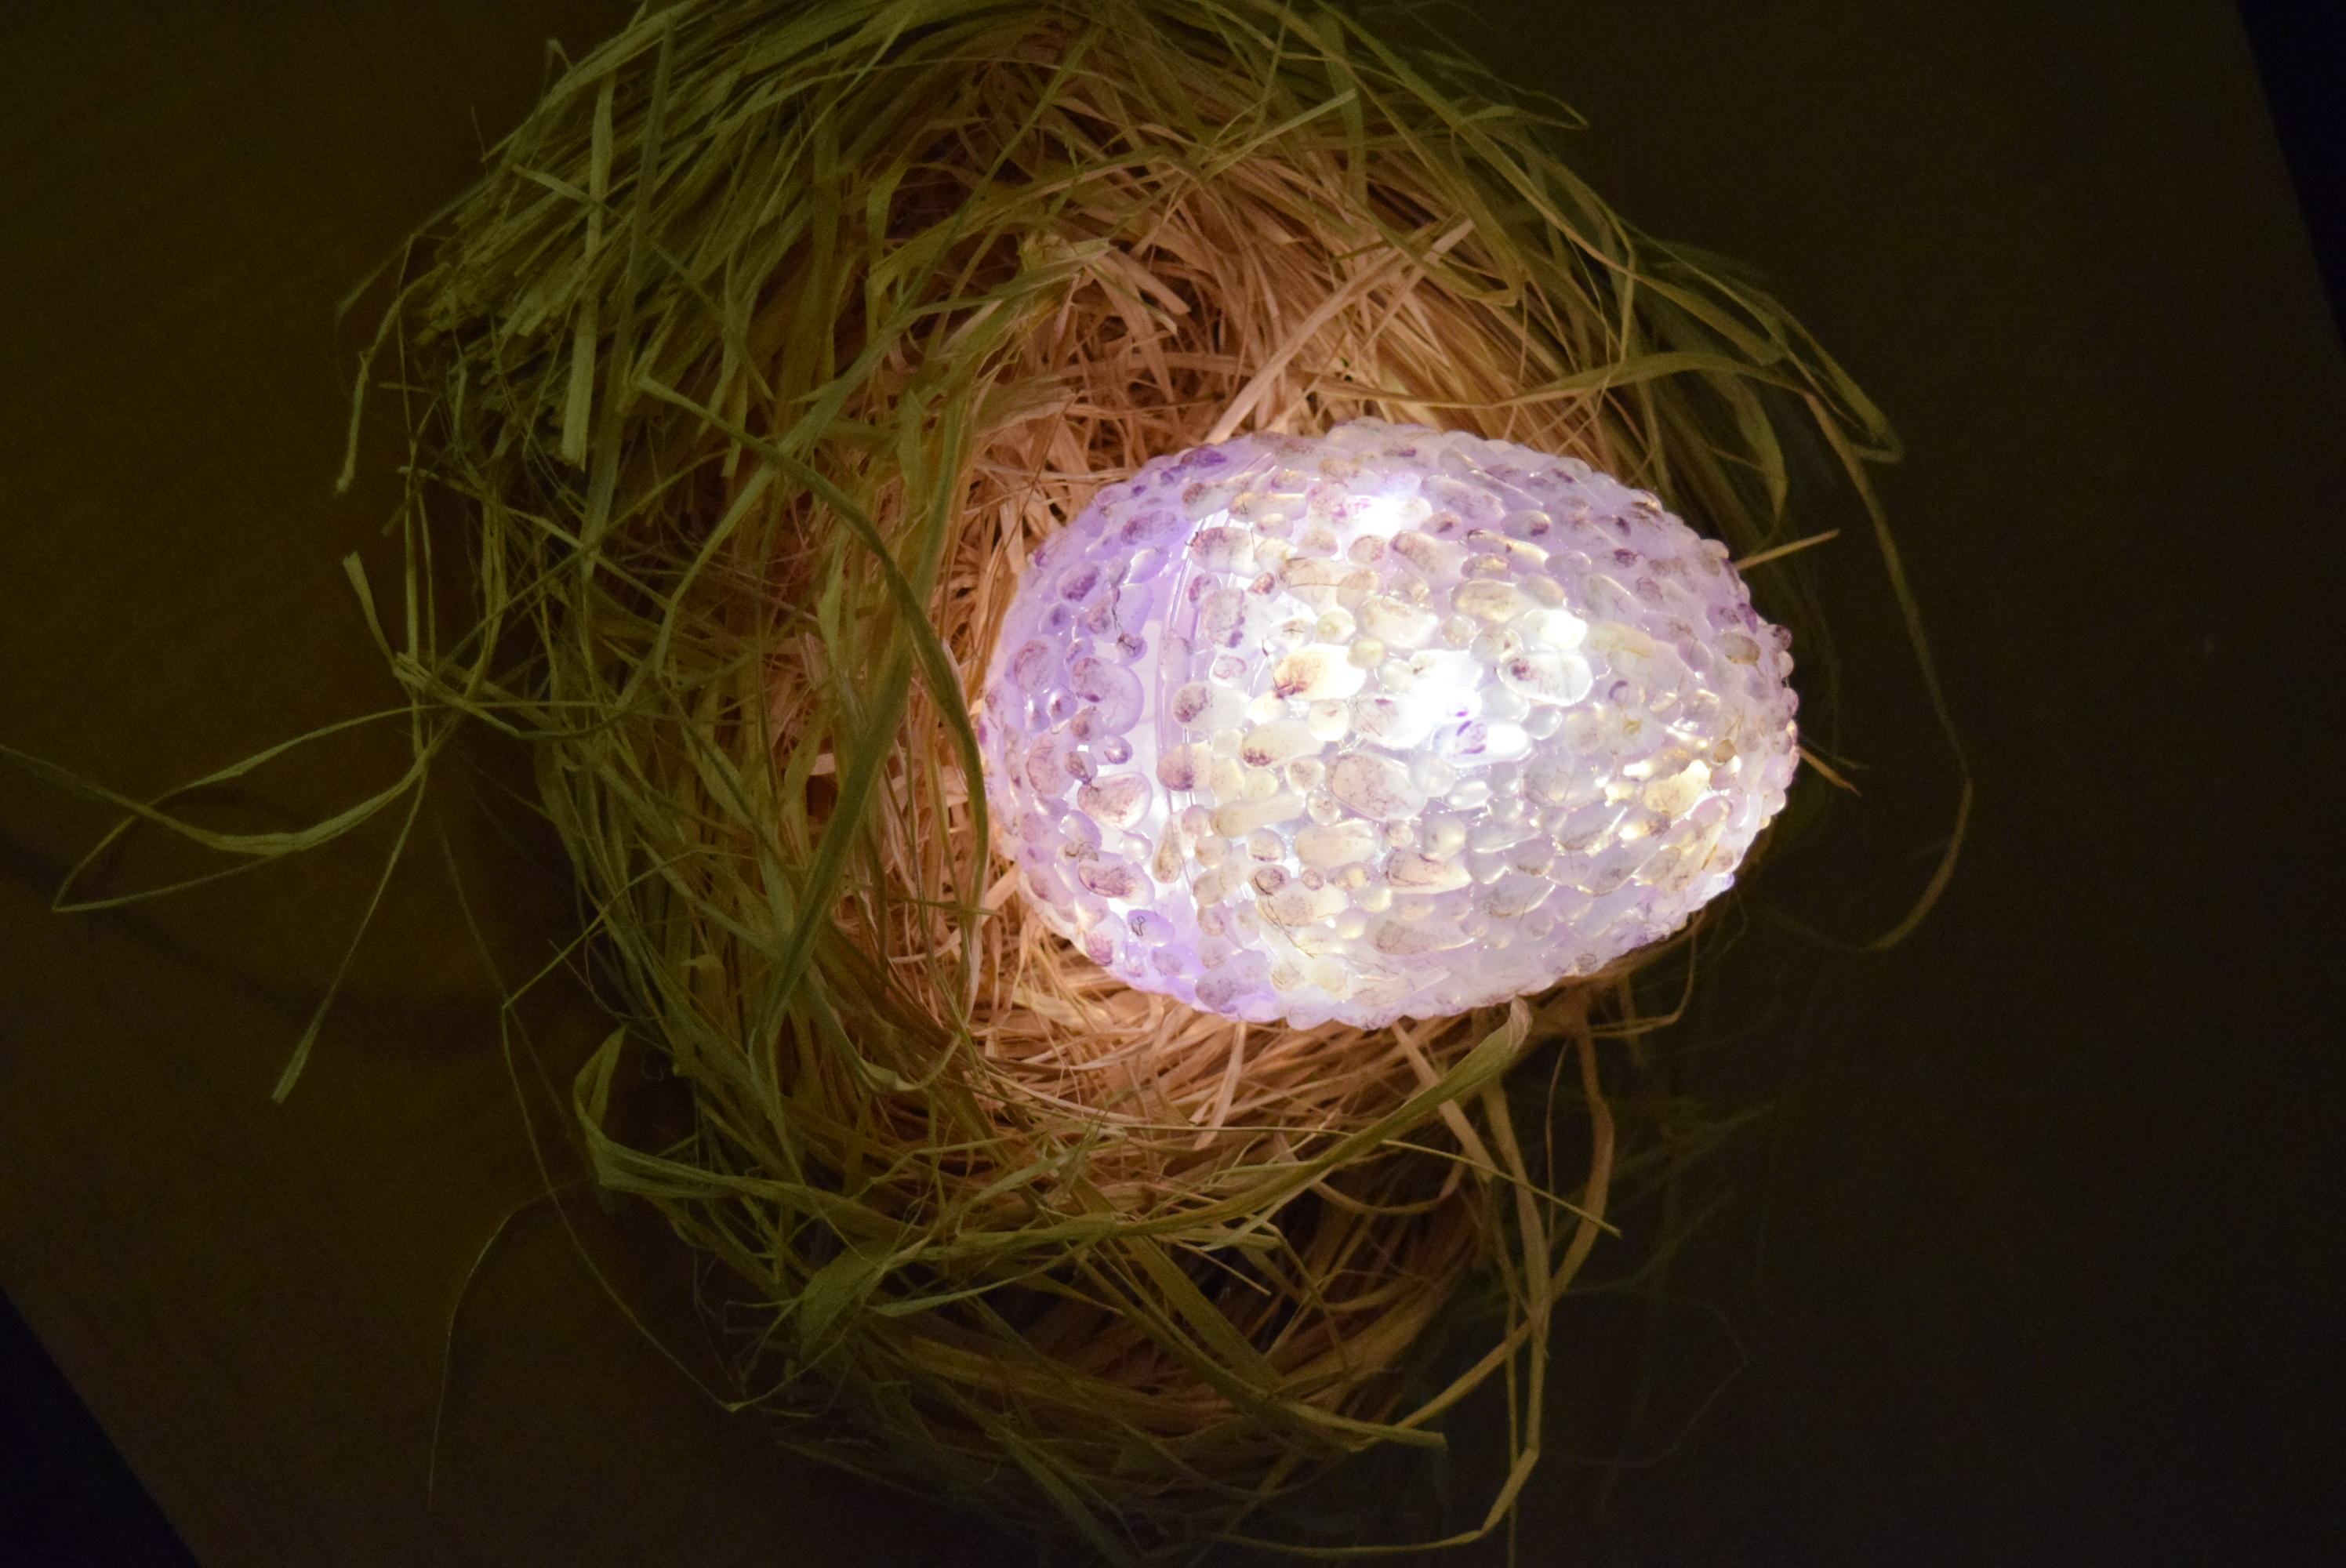 A picture of a purple egg with scales and a dusting of gold color glowing in a raffia nest.